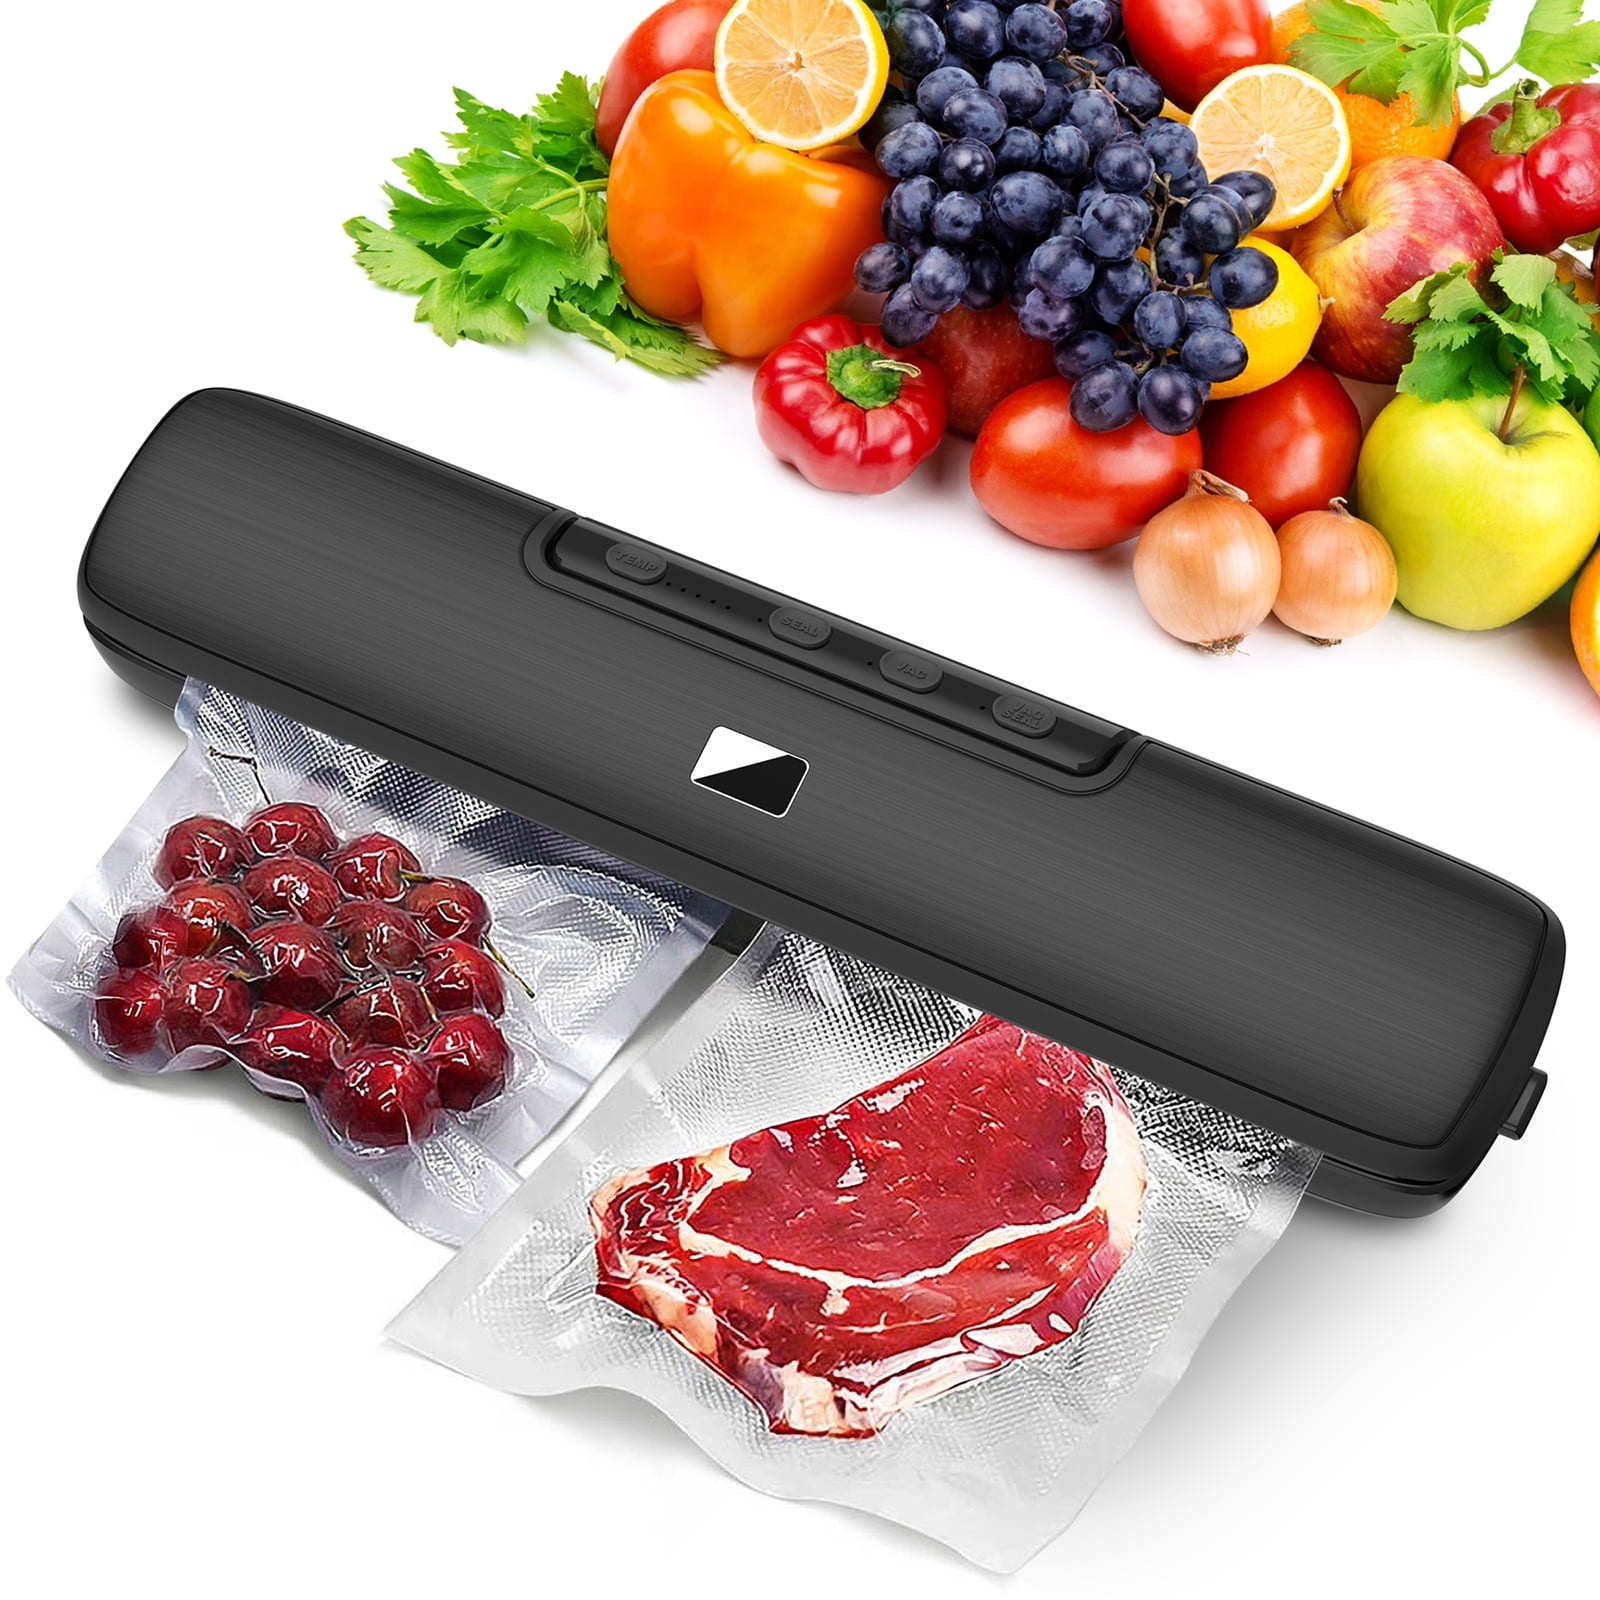 Vacuum Sealer Machine with 55 Count 8x12 Food Sealers Bags and 8*79'  Vacuum Sealer Roll, Inkbird Automatic Vacuum Sealers Machine with Built-in